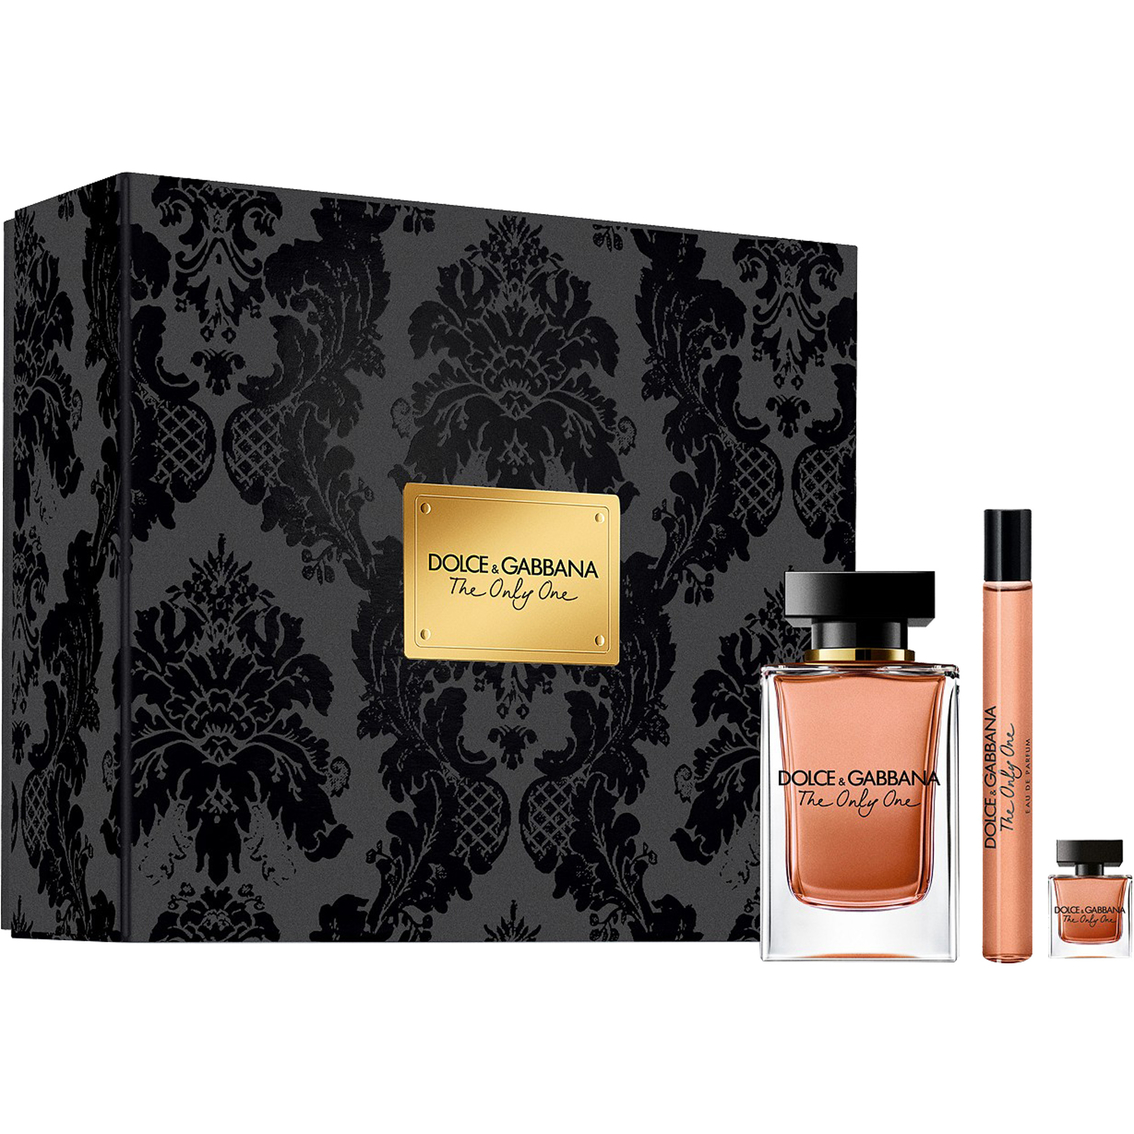 dolce and gabbana the one gift set for her